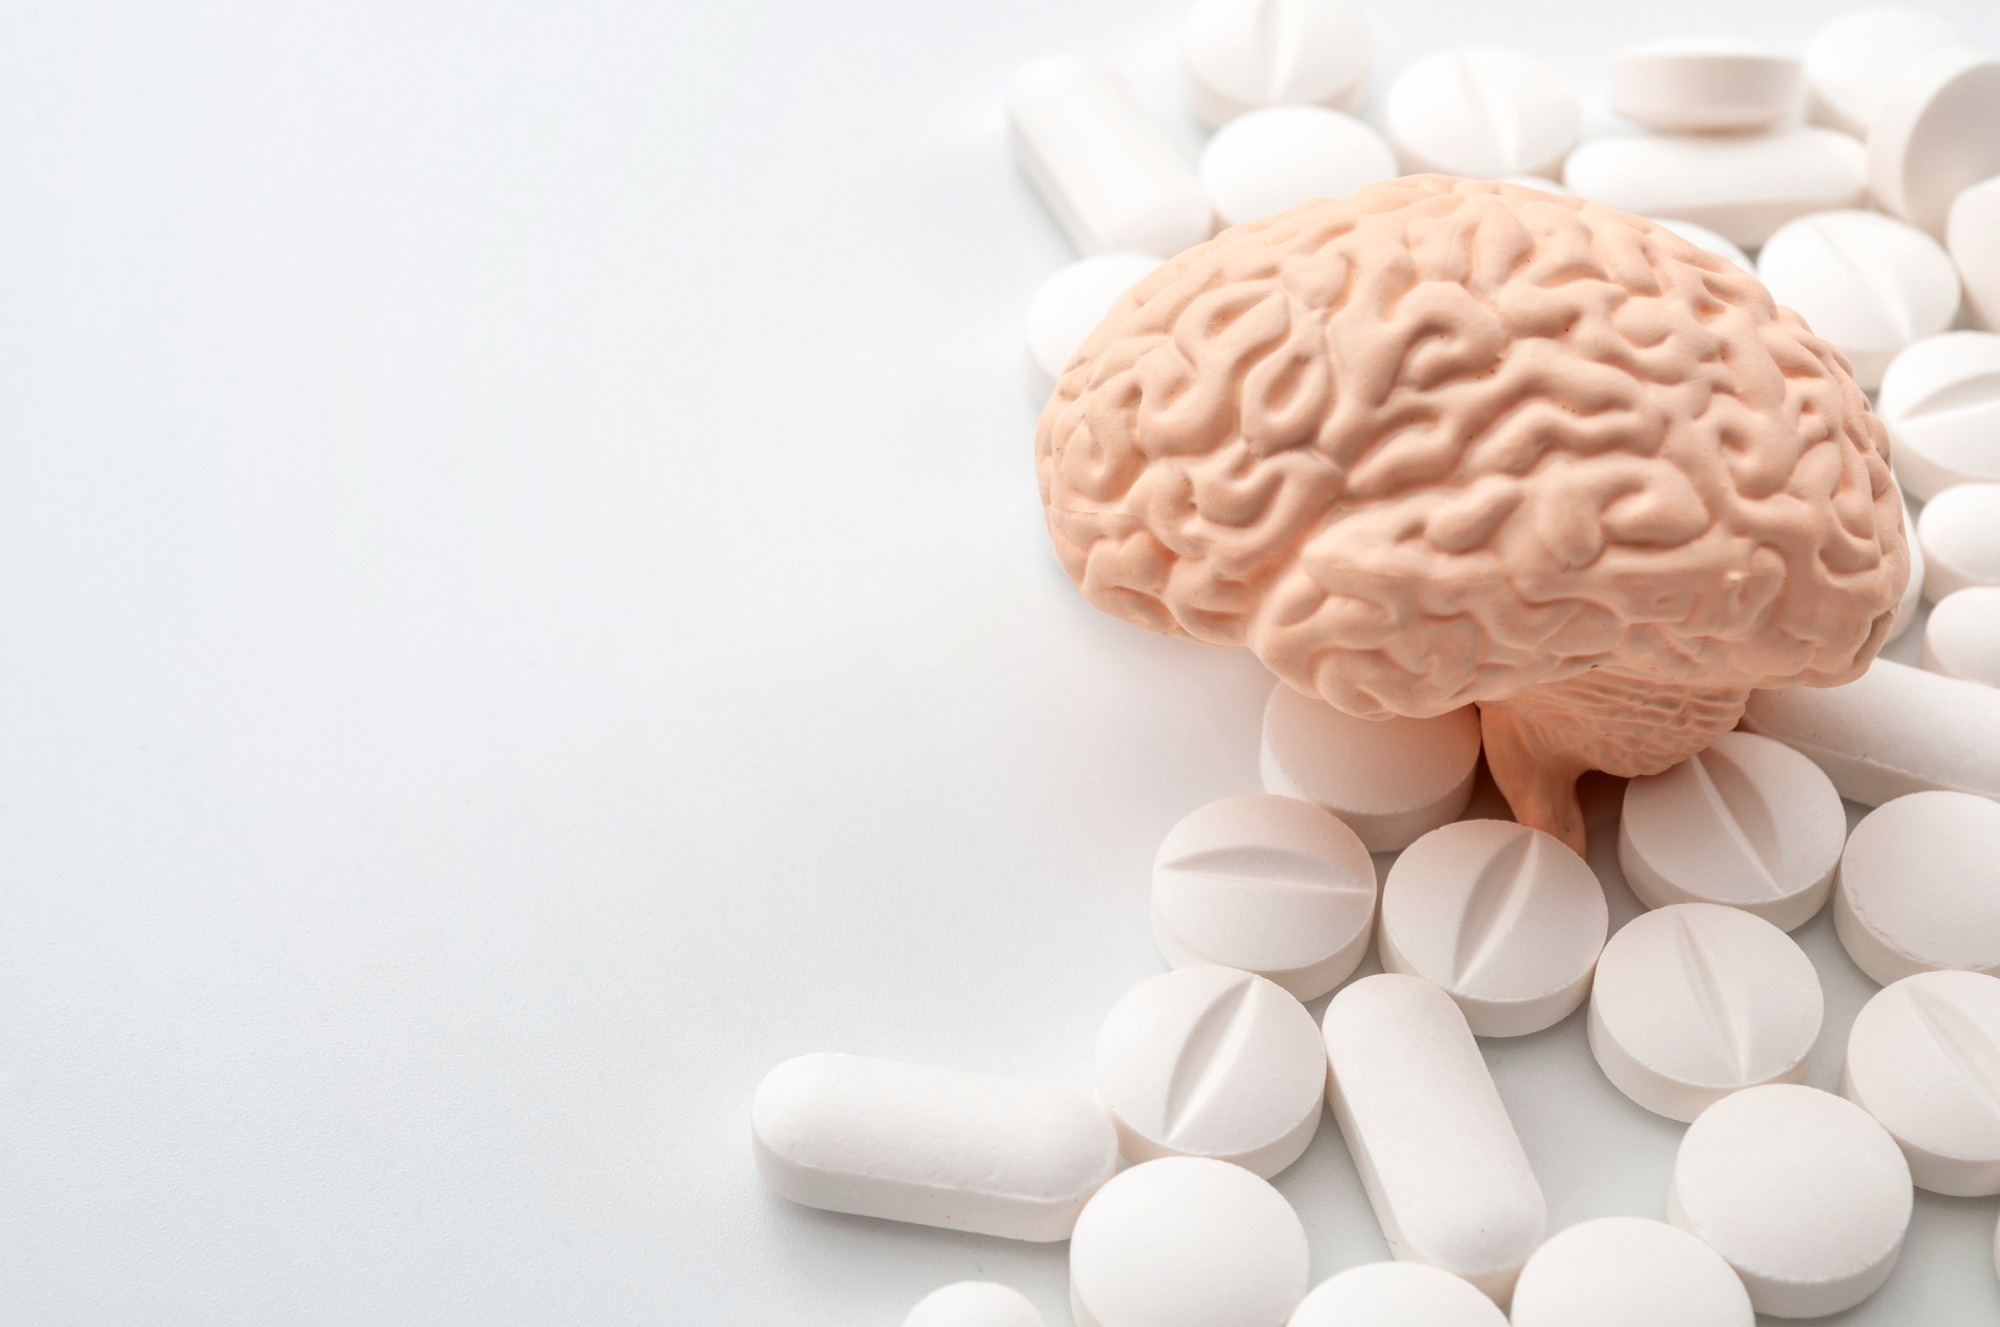 Study: Not so smart? “Smart” drugs increase the level but decrease the quality of cognitive effort. Image Credit: Victor Moussa / Shutterstock